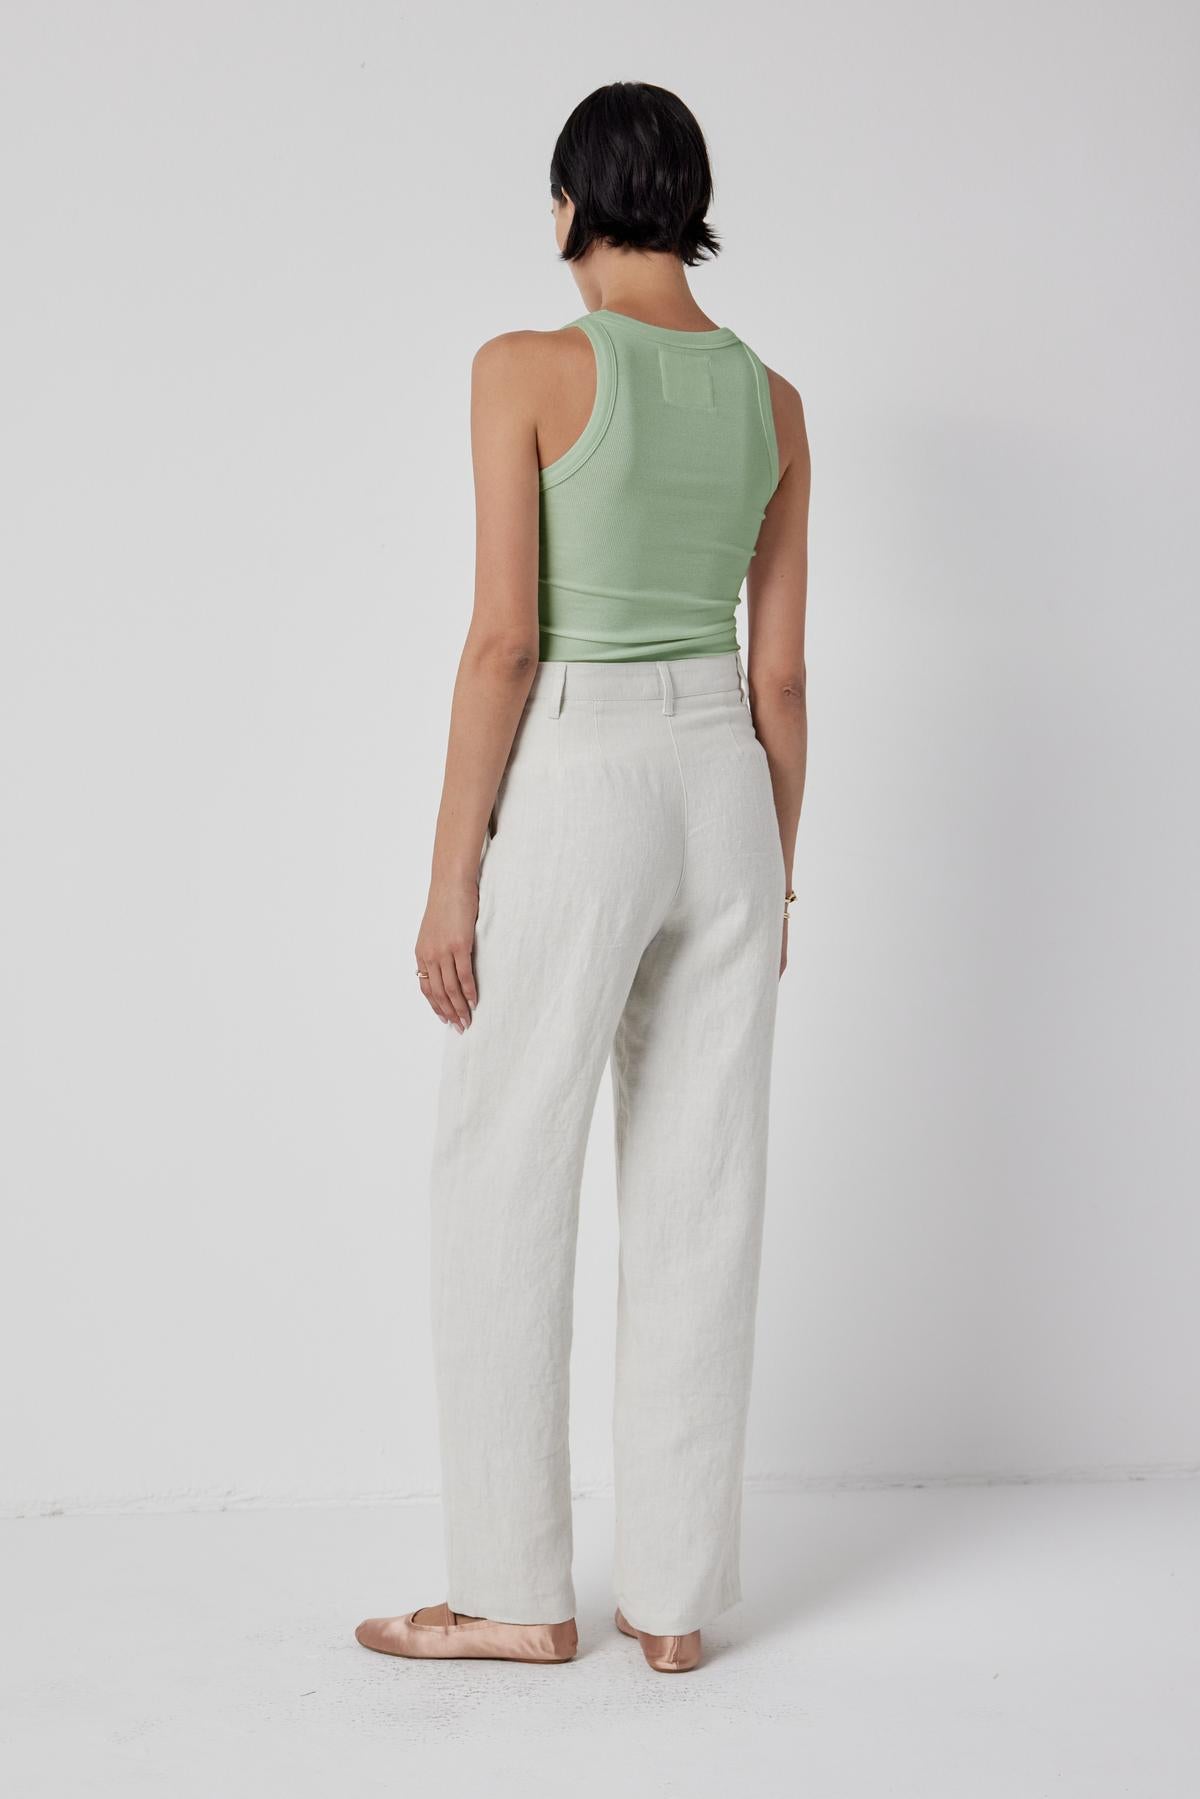 The back view of a woman wearing linen pants and a CRUZ tank top by Velvet by Jenny Graham, showcasing her toned body.-36198187991233